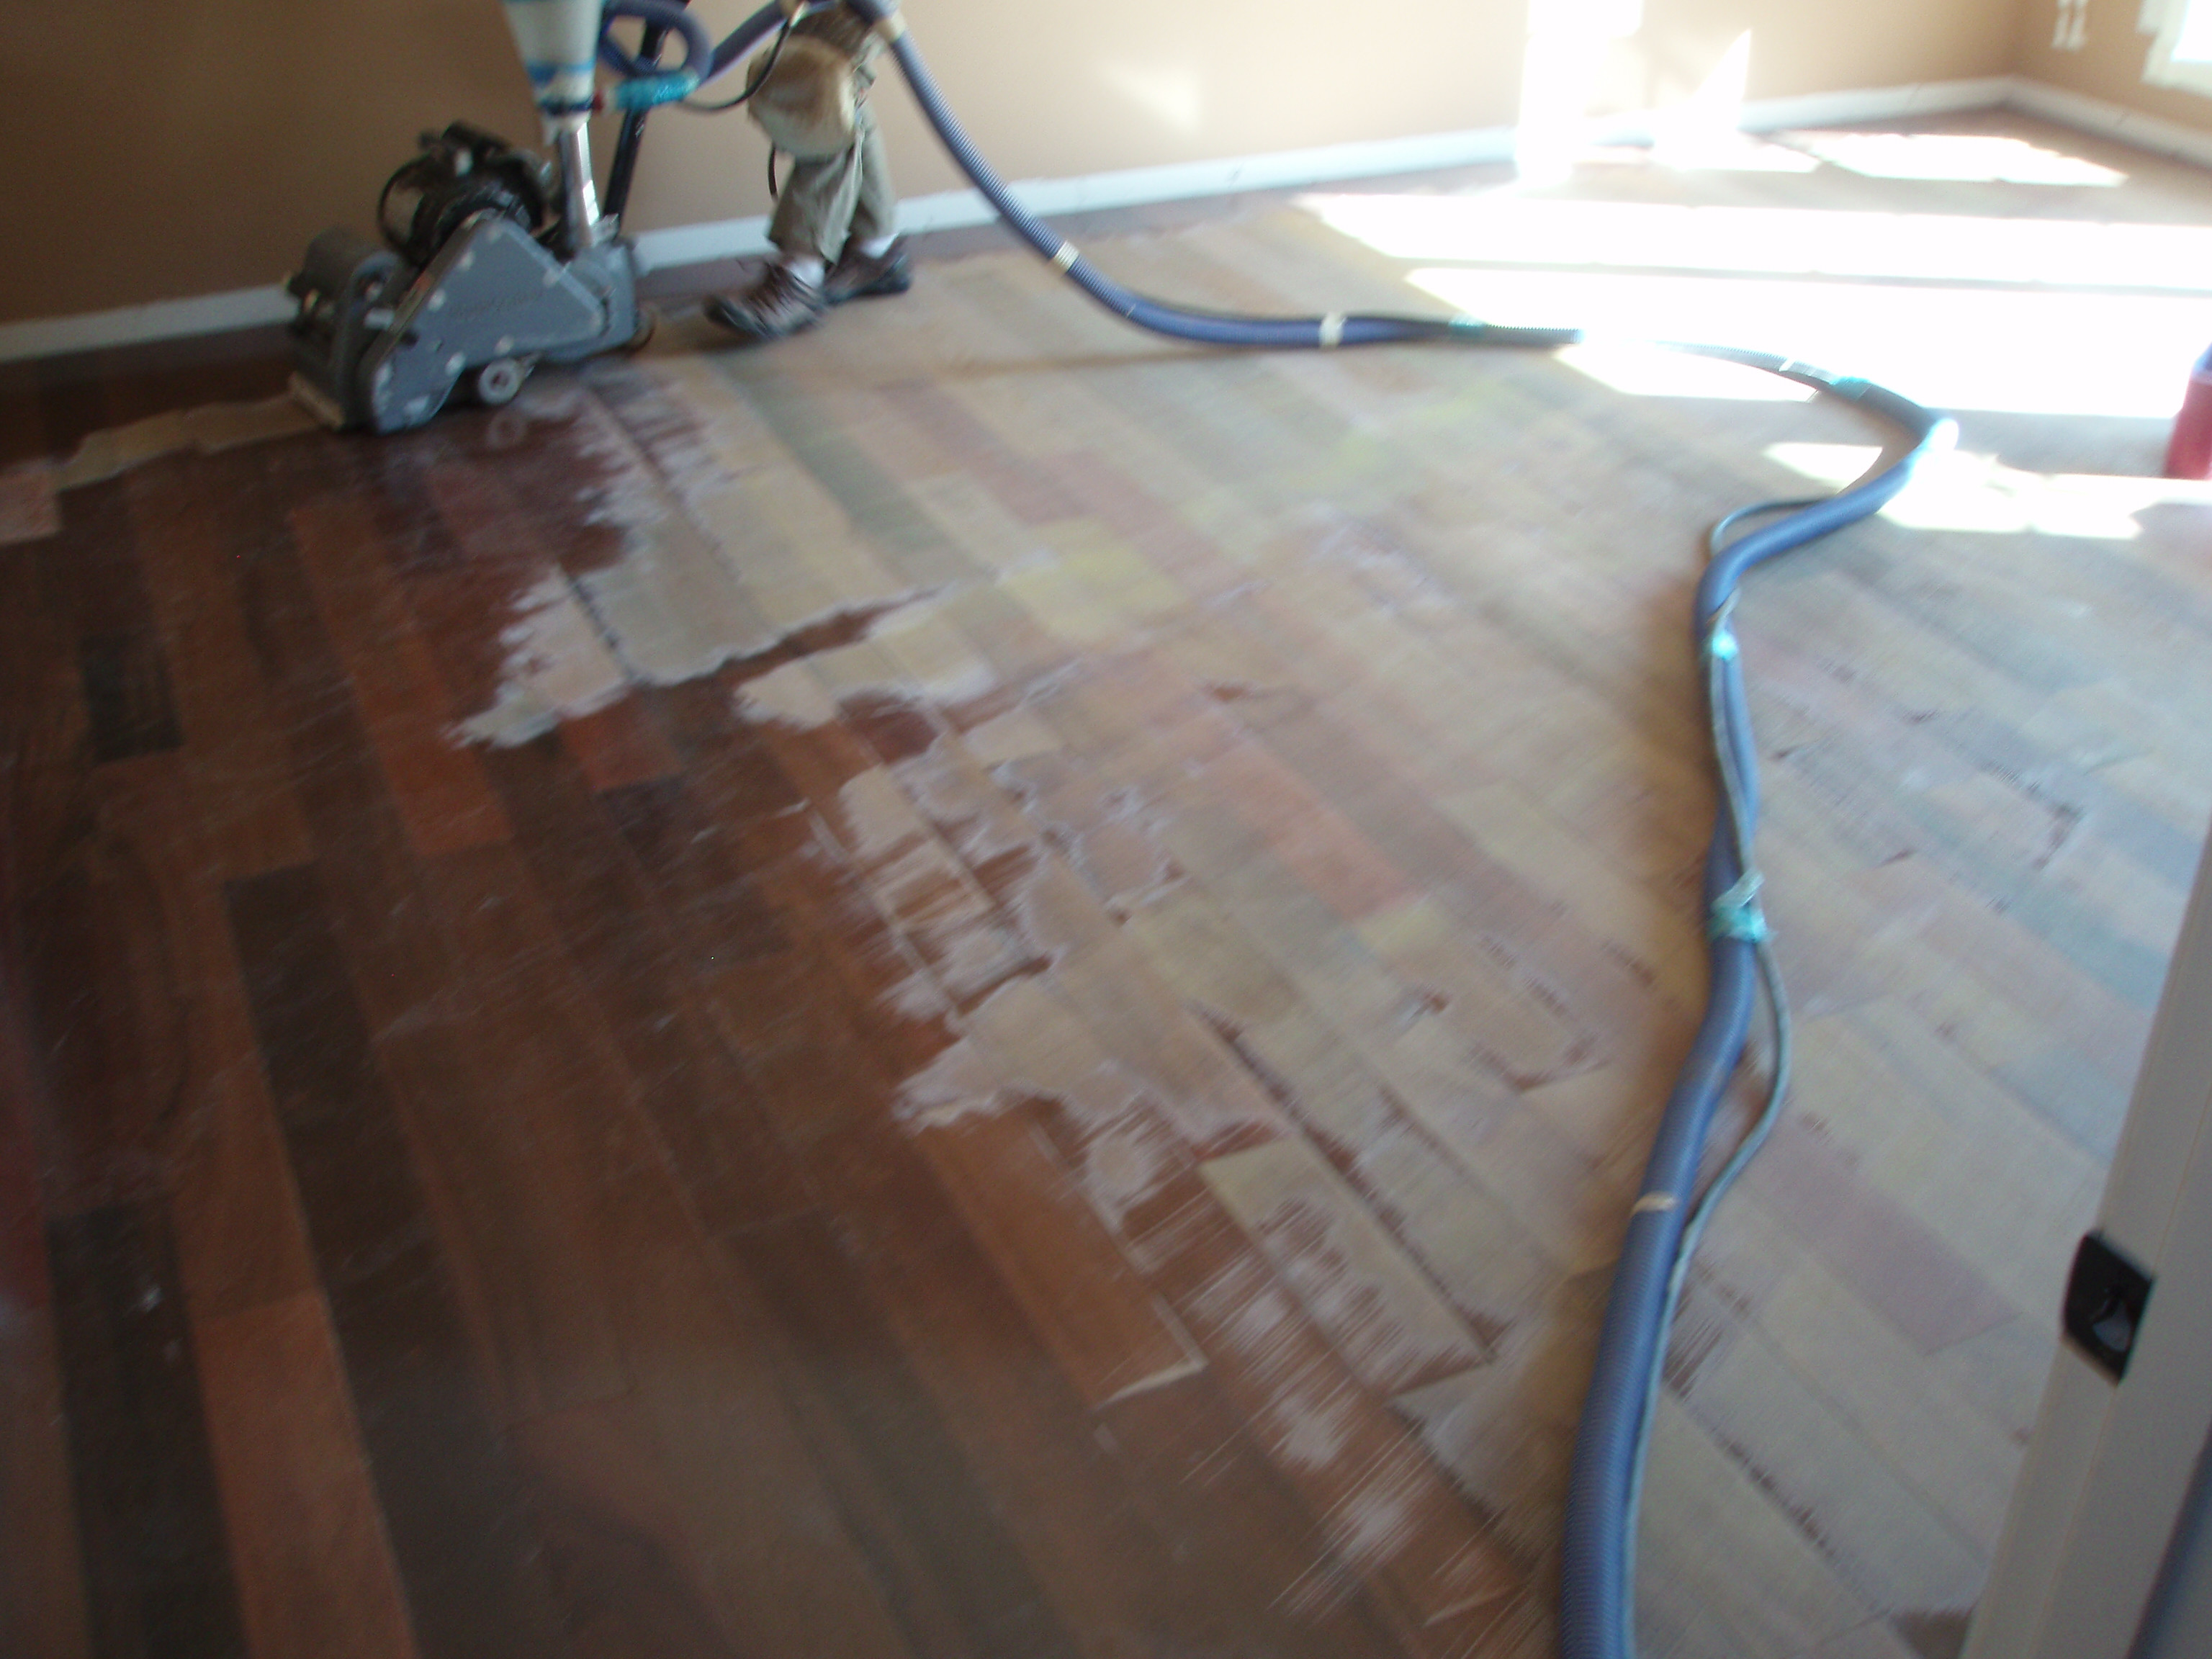 oak hardwood flooring types of can you refinish bamboo floors floor pertaining to can you refinish bamboo floors will refinishingod floors pet stains old without sanding wood with